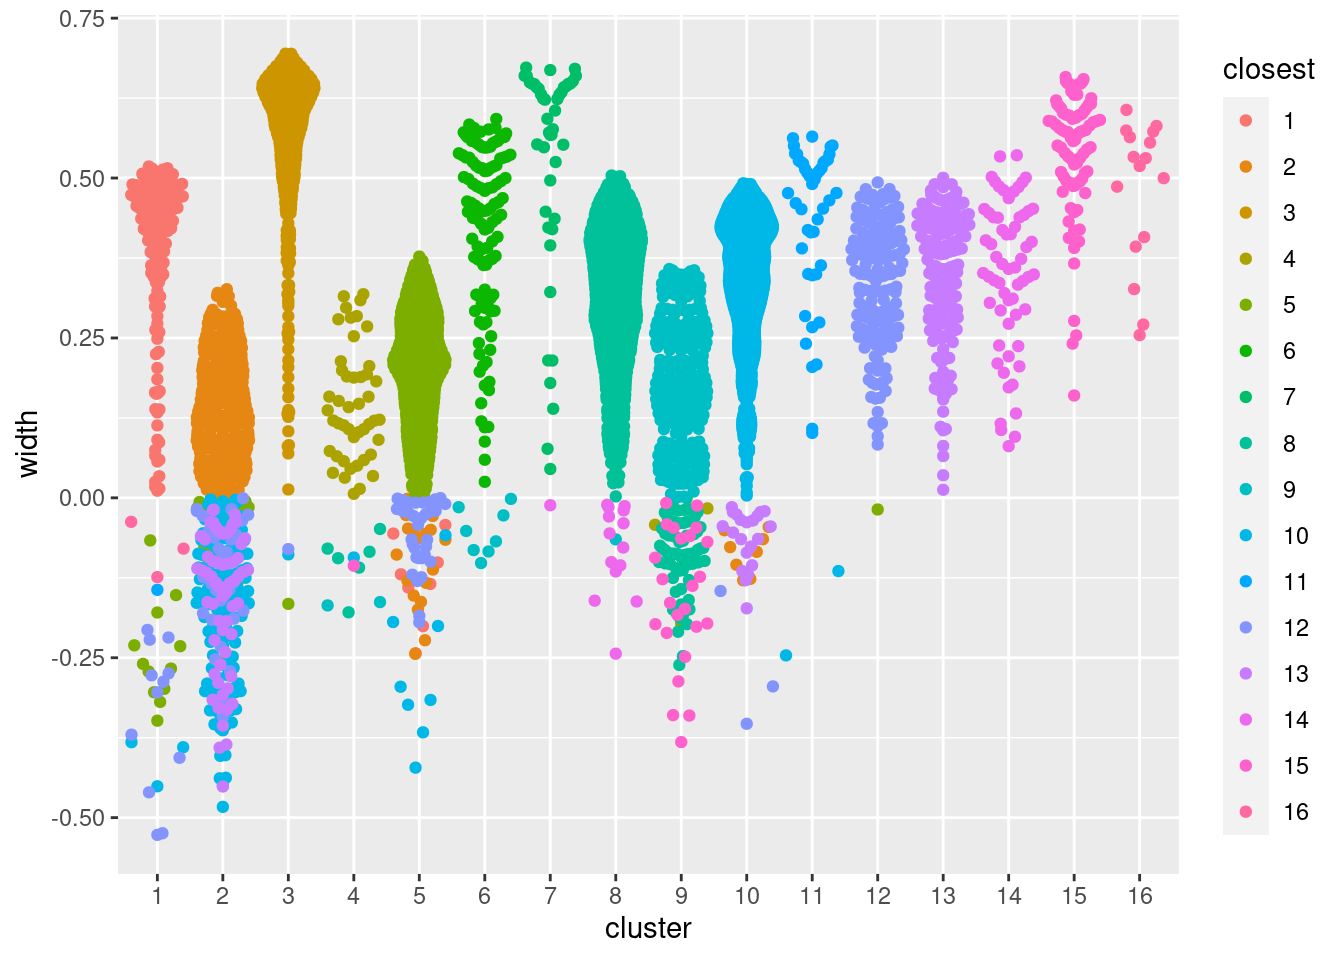 Distribution of the approximate silhouette width across cells in each cluster of the PBMC dataset. Each point represents a cell and colored with the identity of its own cluster if its silhouette width is positive and that of the closest other cluster if the width is negative.